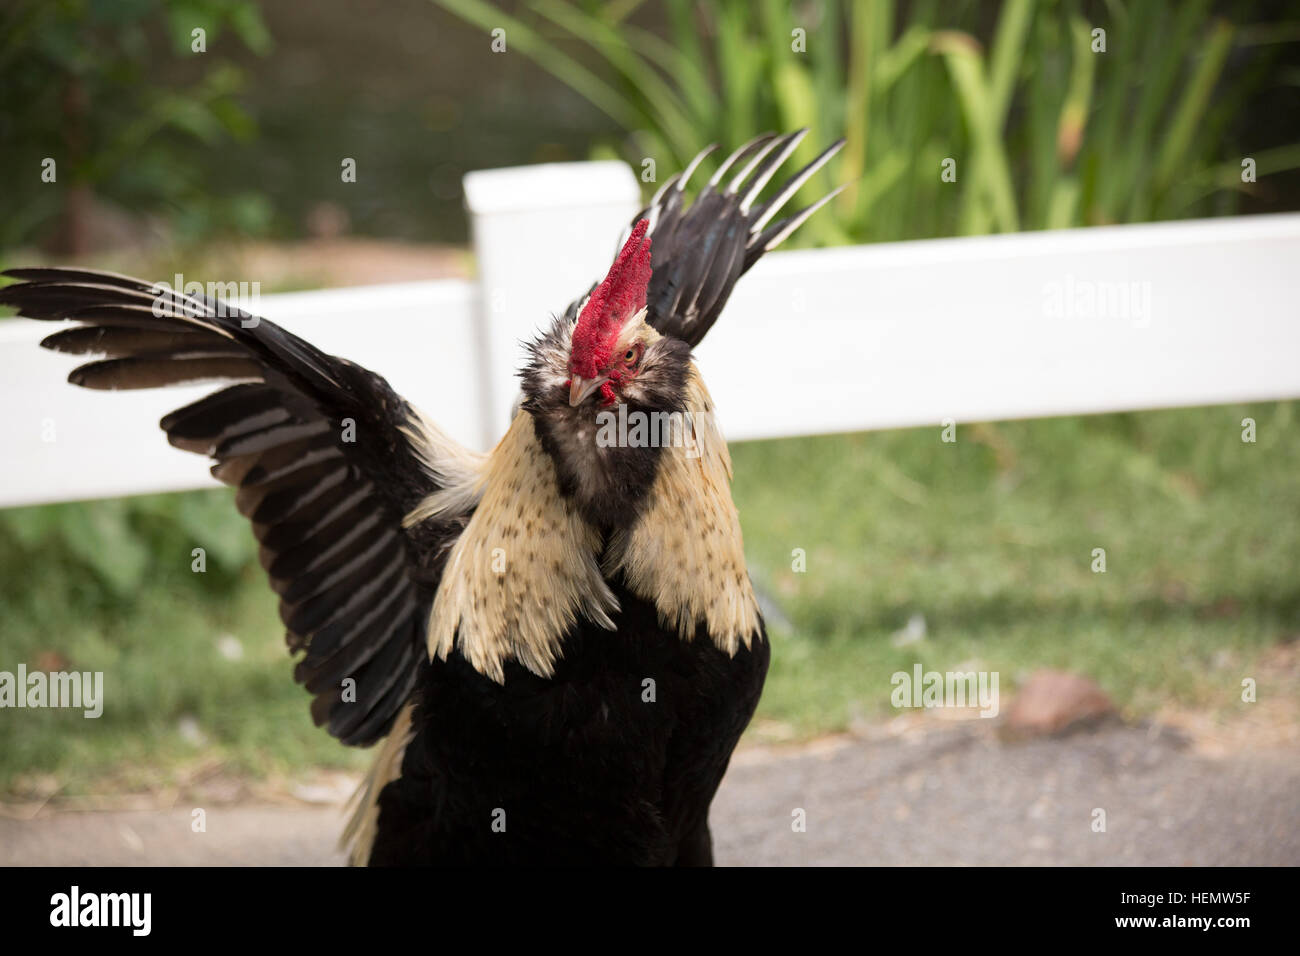 Faverolle rooster in aggression display Stock Photo